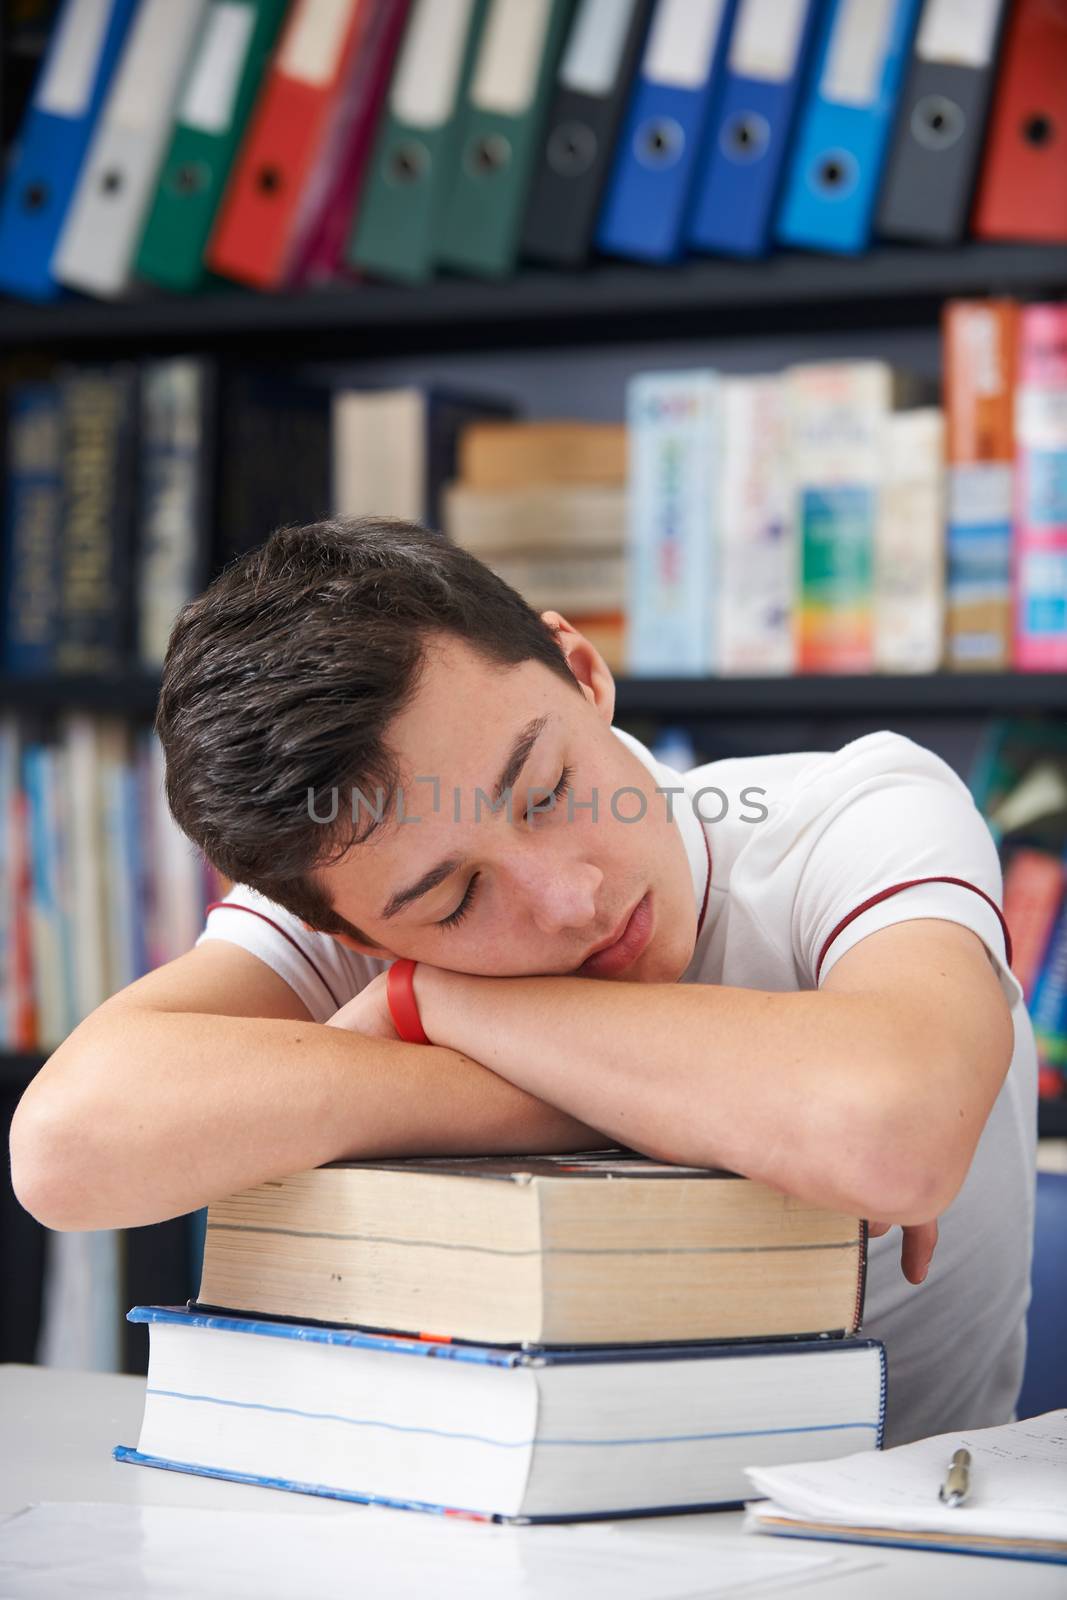 Tired Male Teenage Student Sleeping In Library